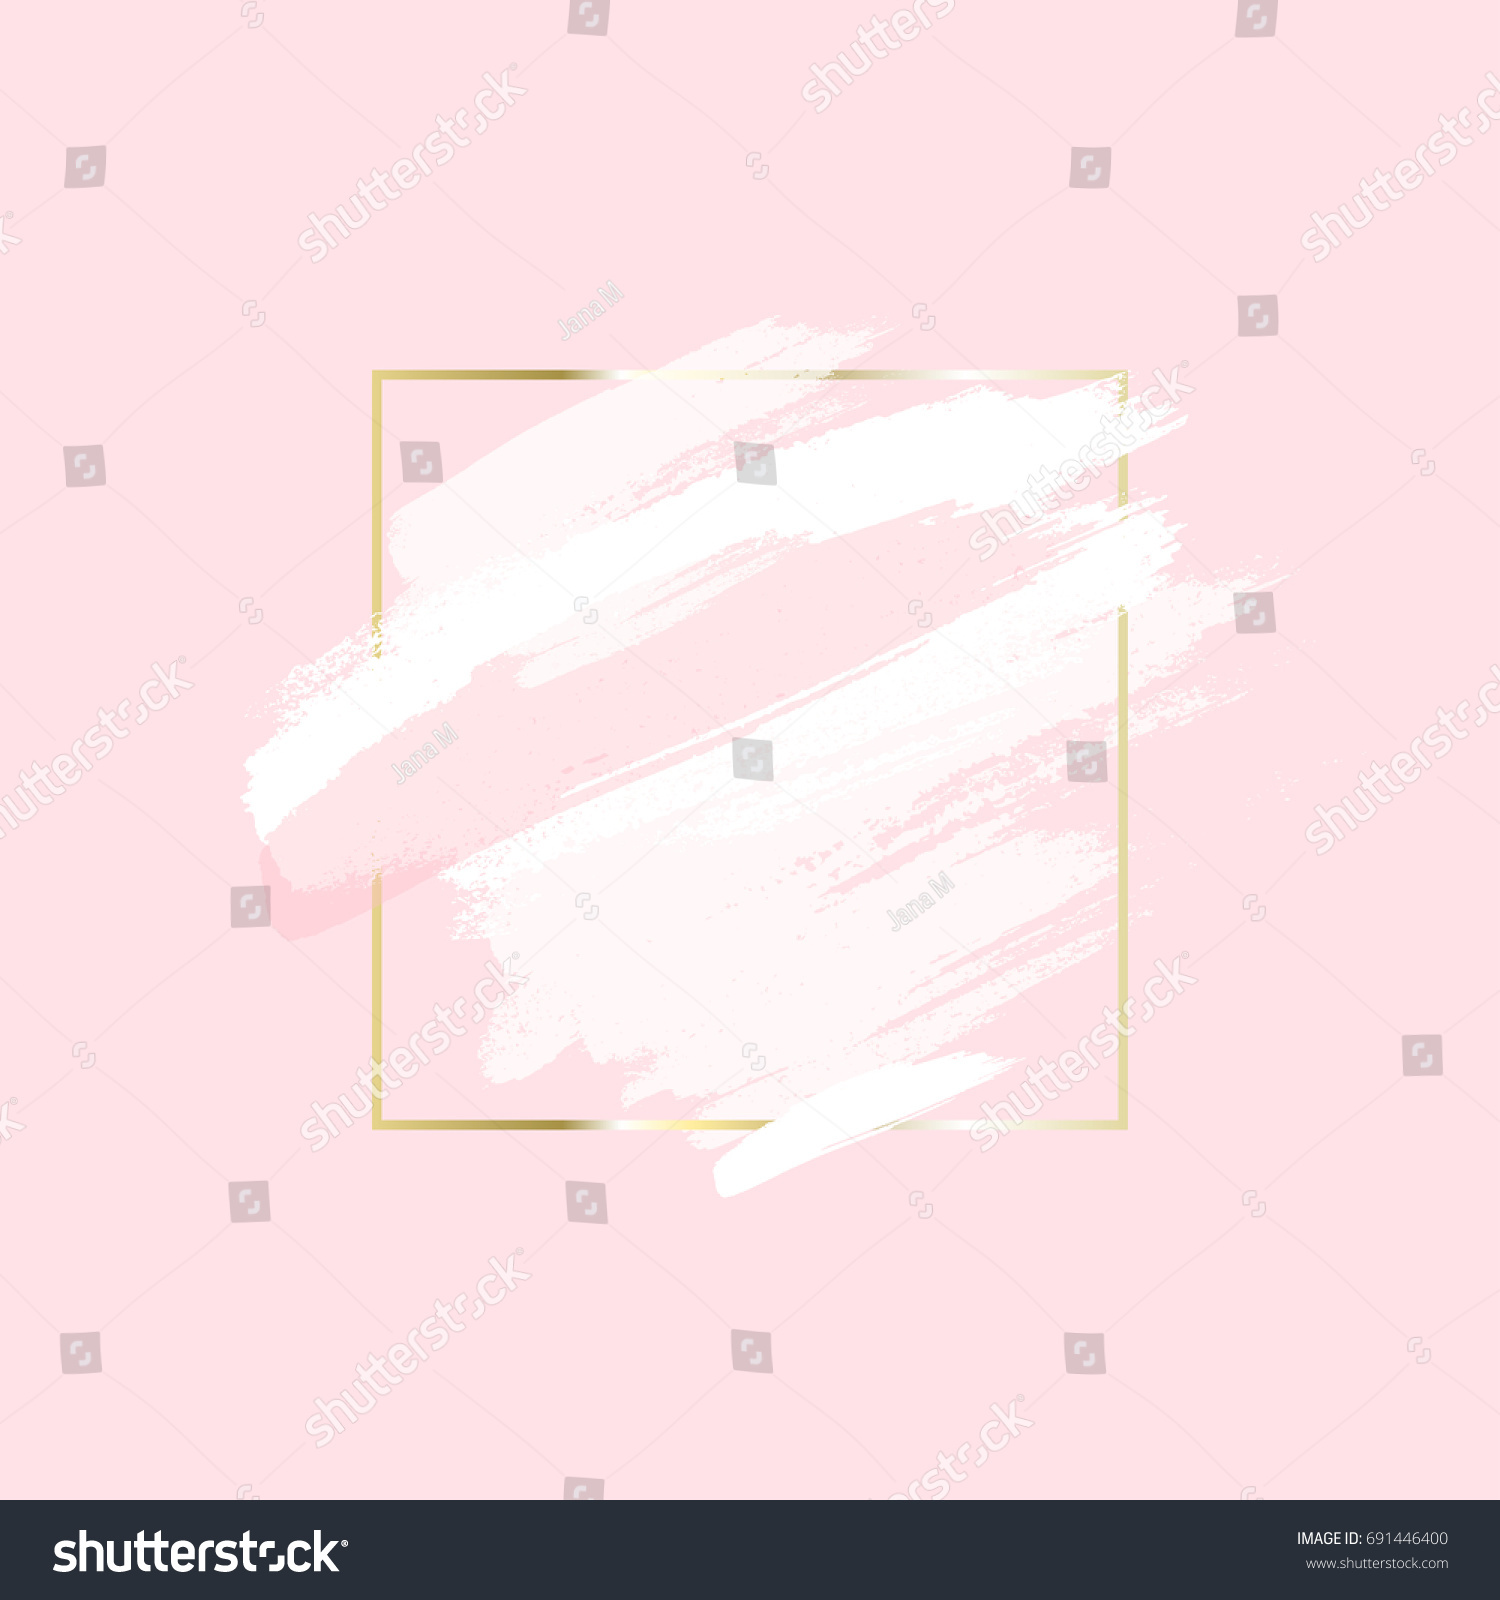 Vector Abstract Background Brush Strokes Square Stock Vector (Royalty ...